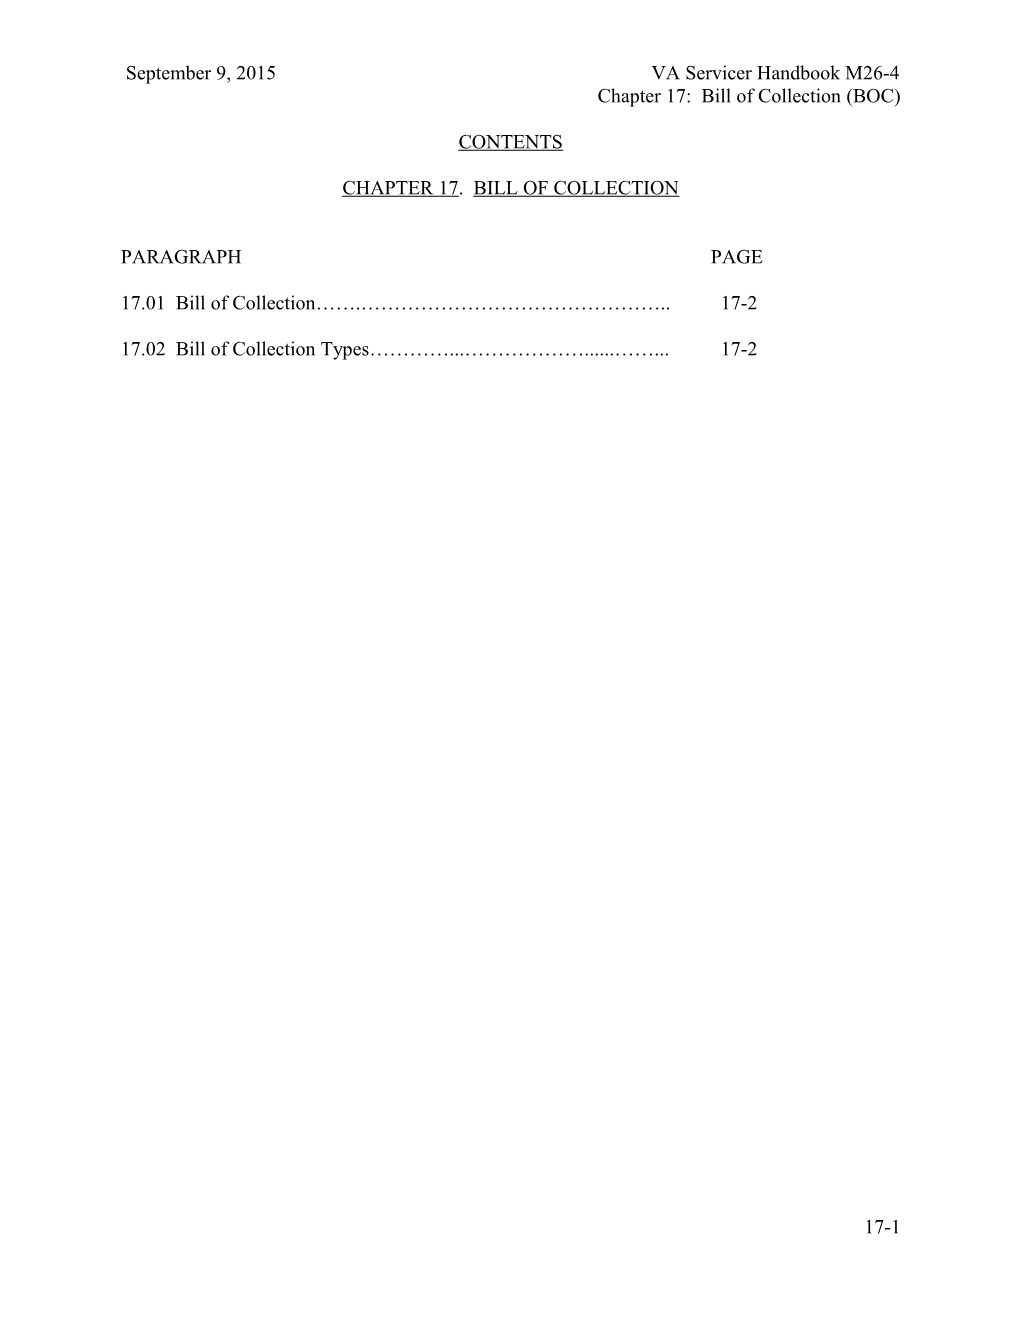 Chapter 17: Bill of Collection (BOC)